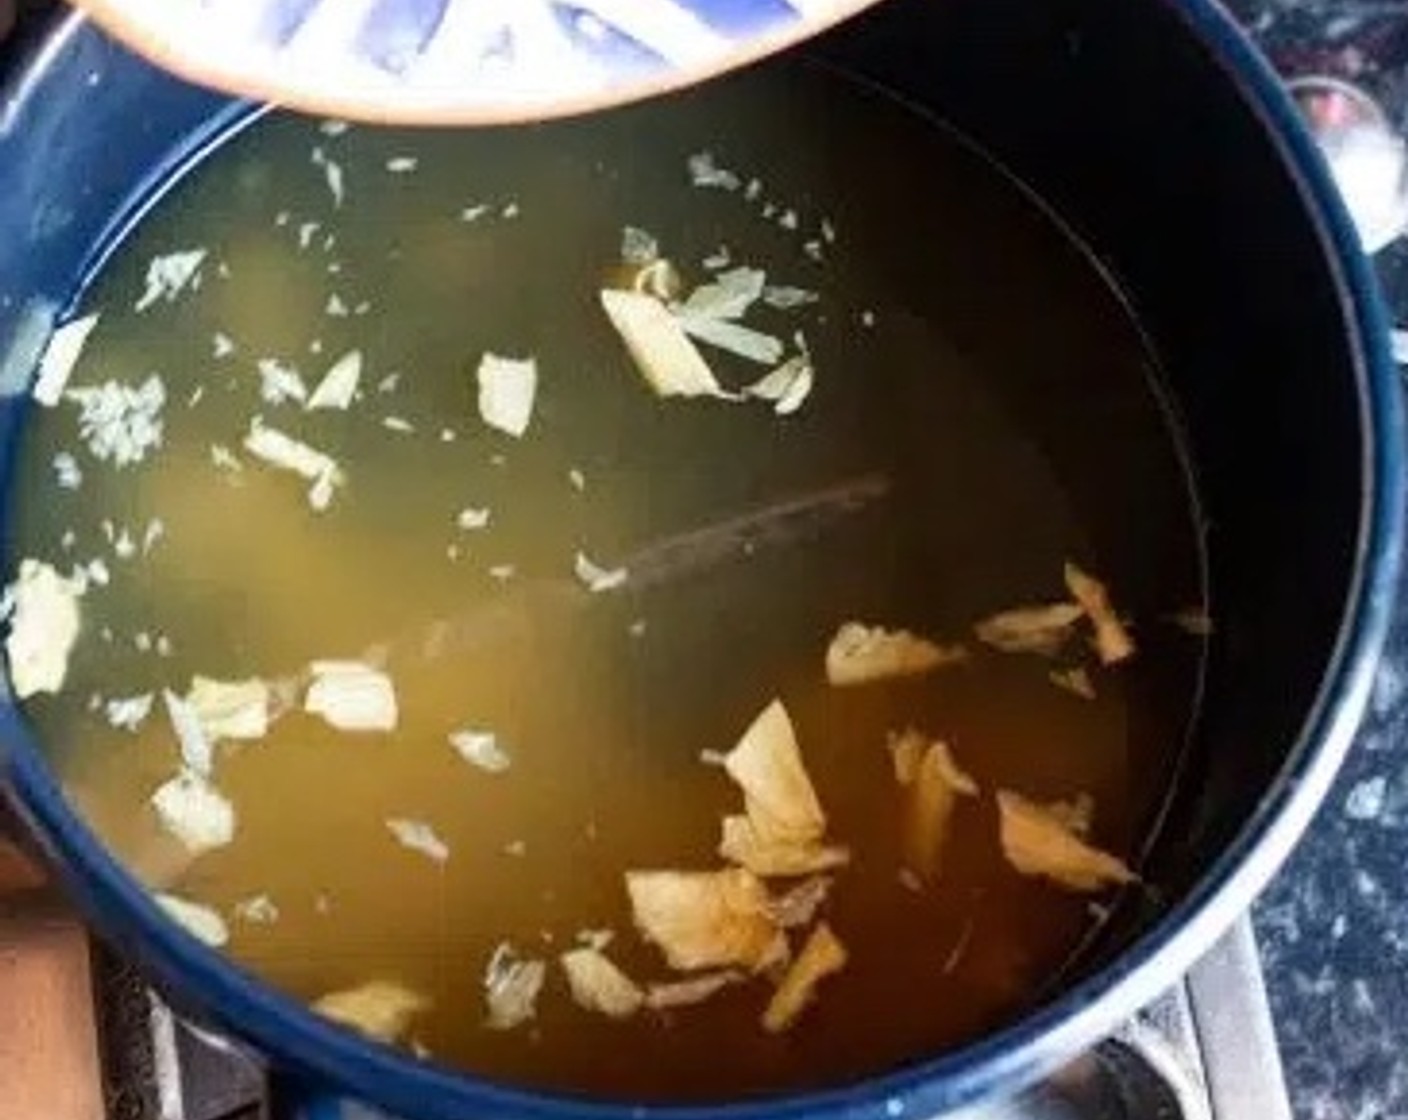 step 1 In a saucepan, add Garlic (1 clove), Fresh Ginger (1/2 tsp), Vegetable Broth Powder (1/2 Tbsp), and Dried Beancurd Stick (1/2). Cook on high heat until it starts to boil.